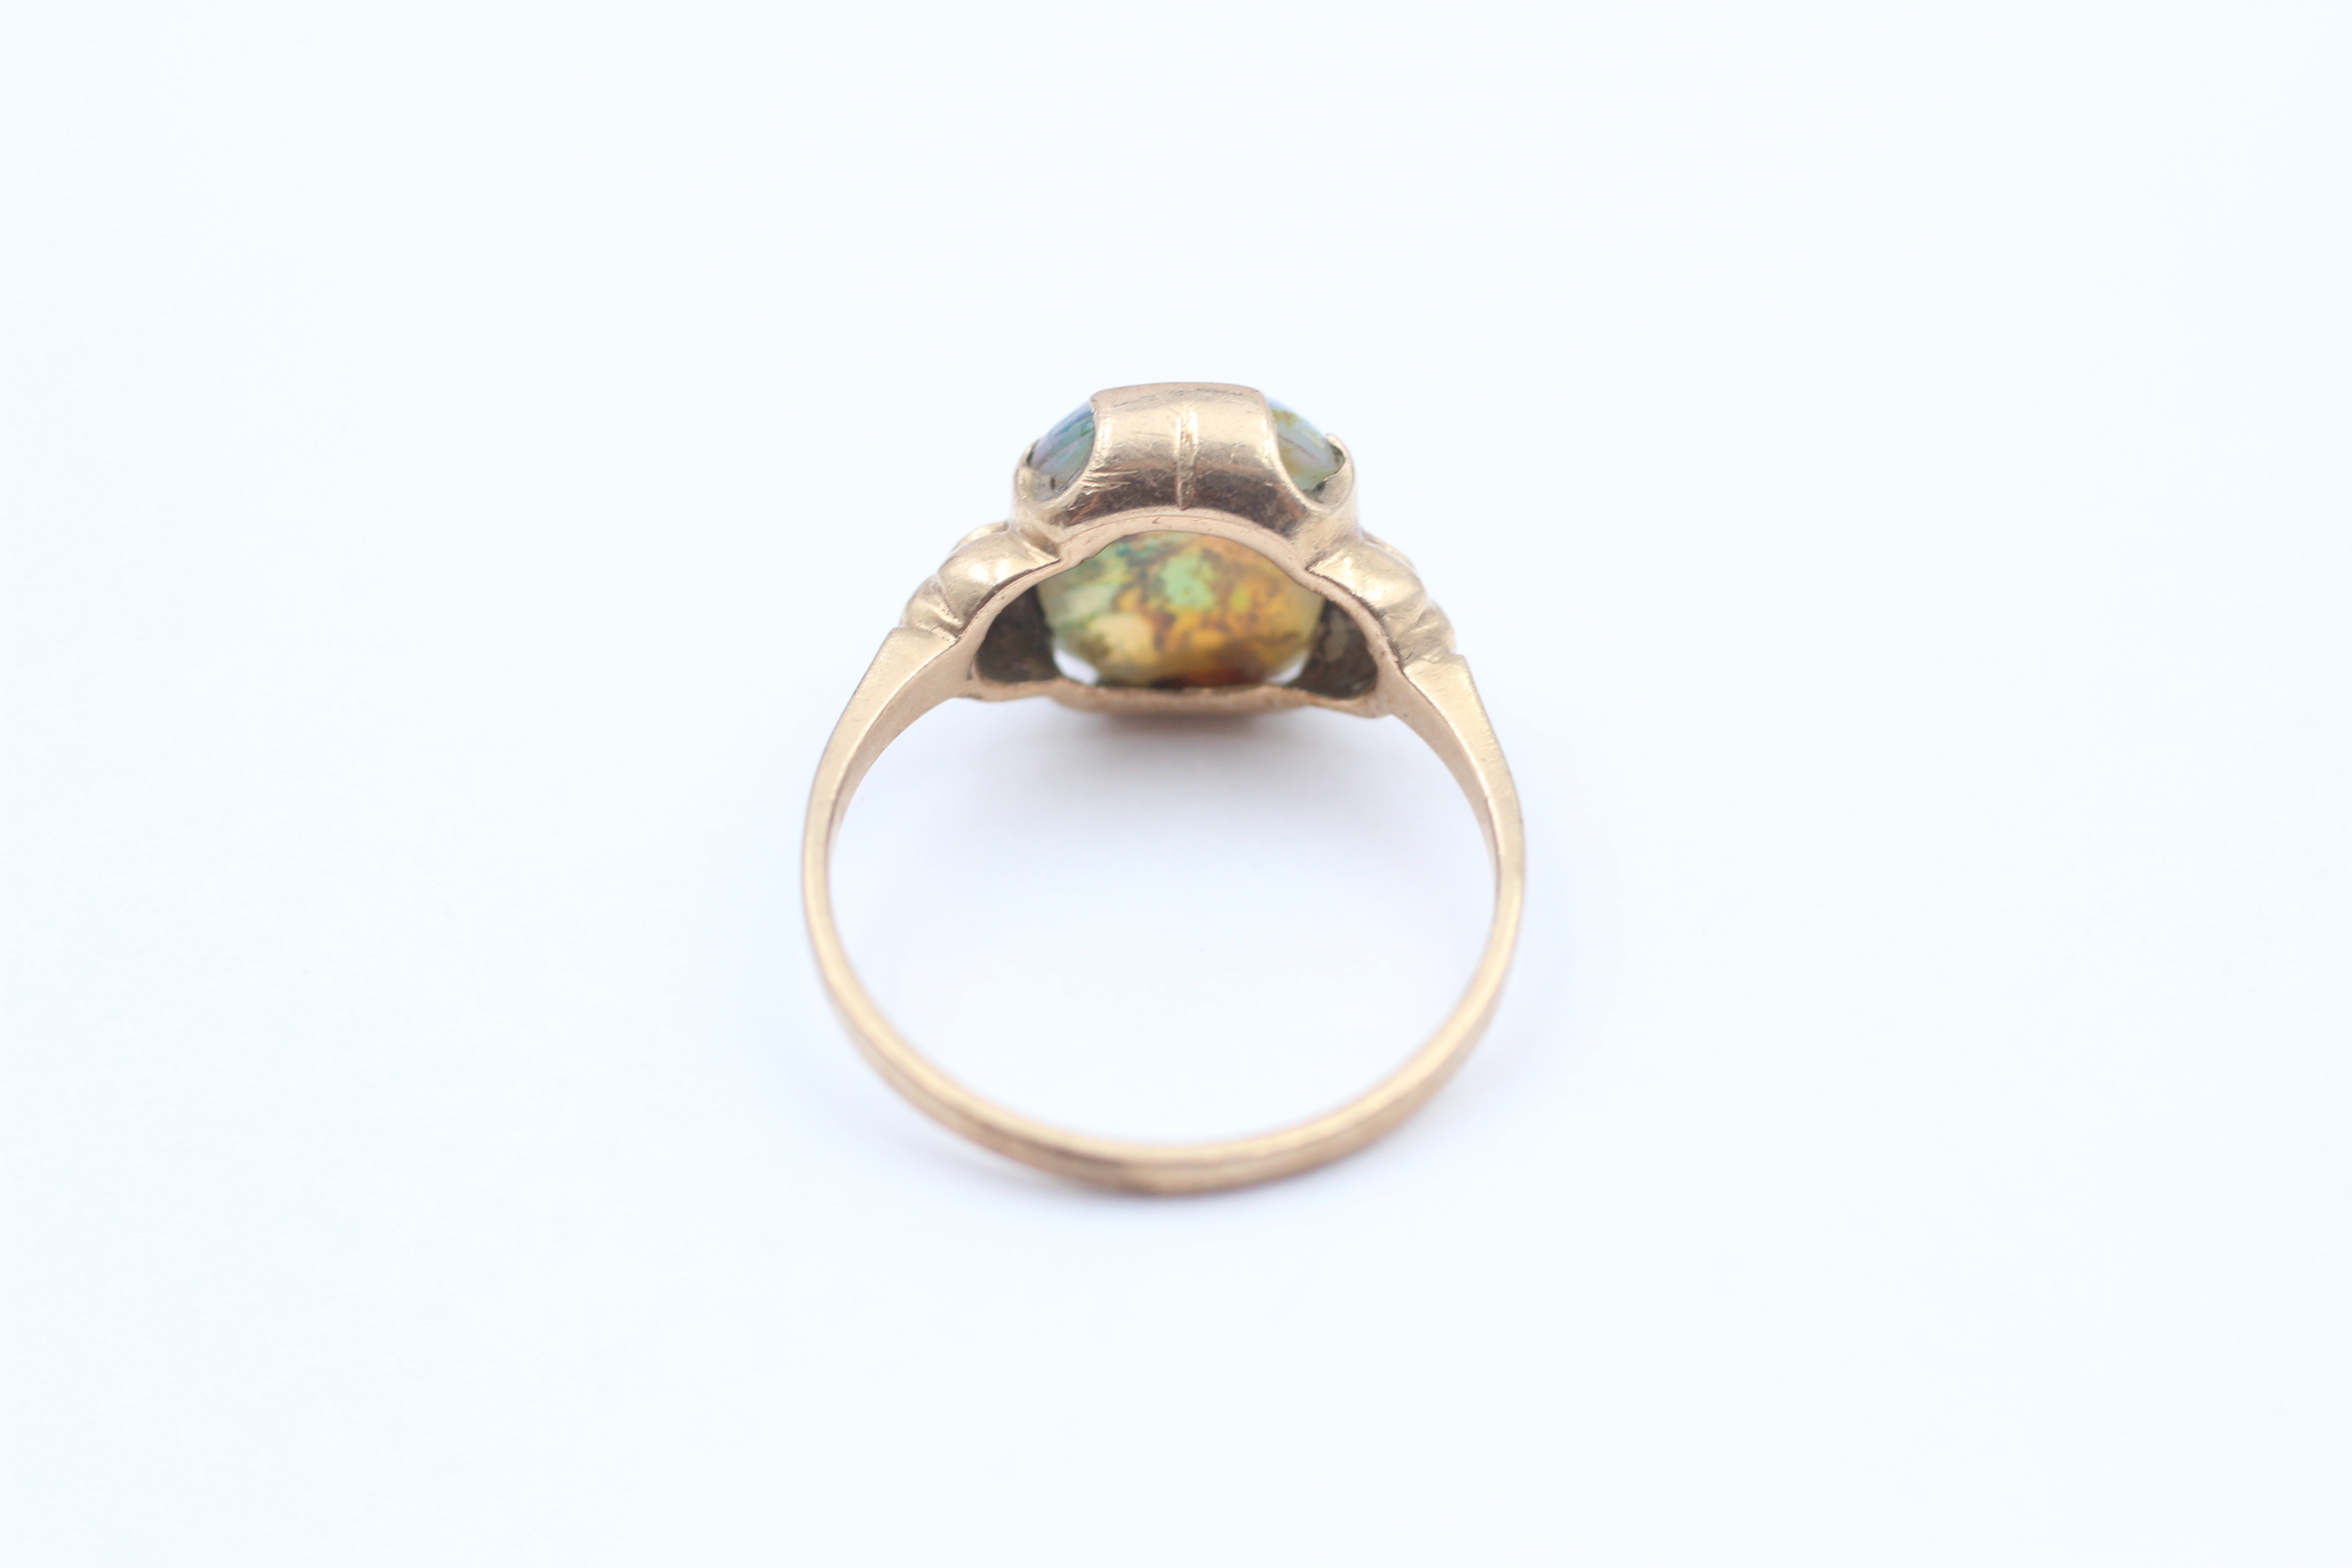 9ct Gold Vintage Opal Statement Ring - Image 3 of 4